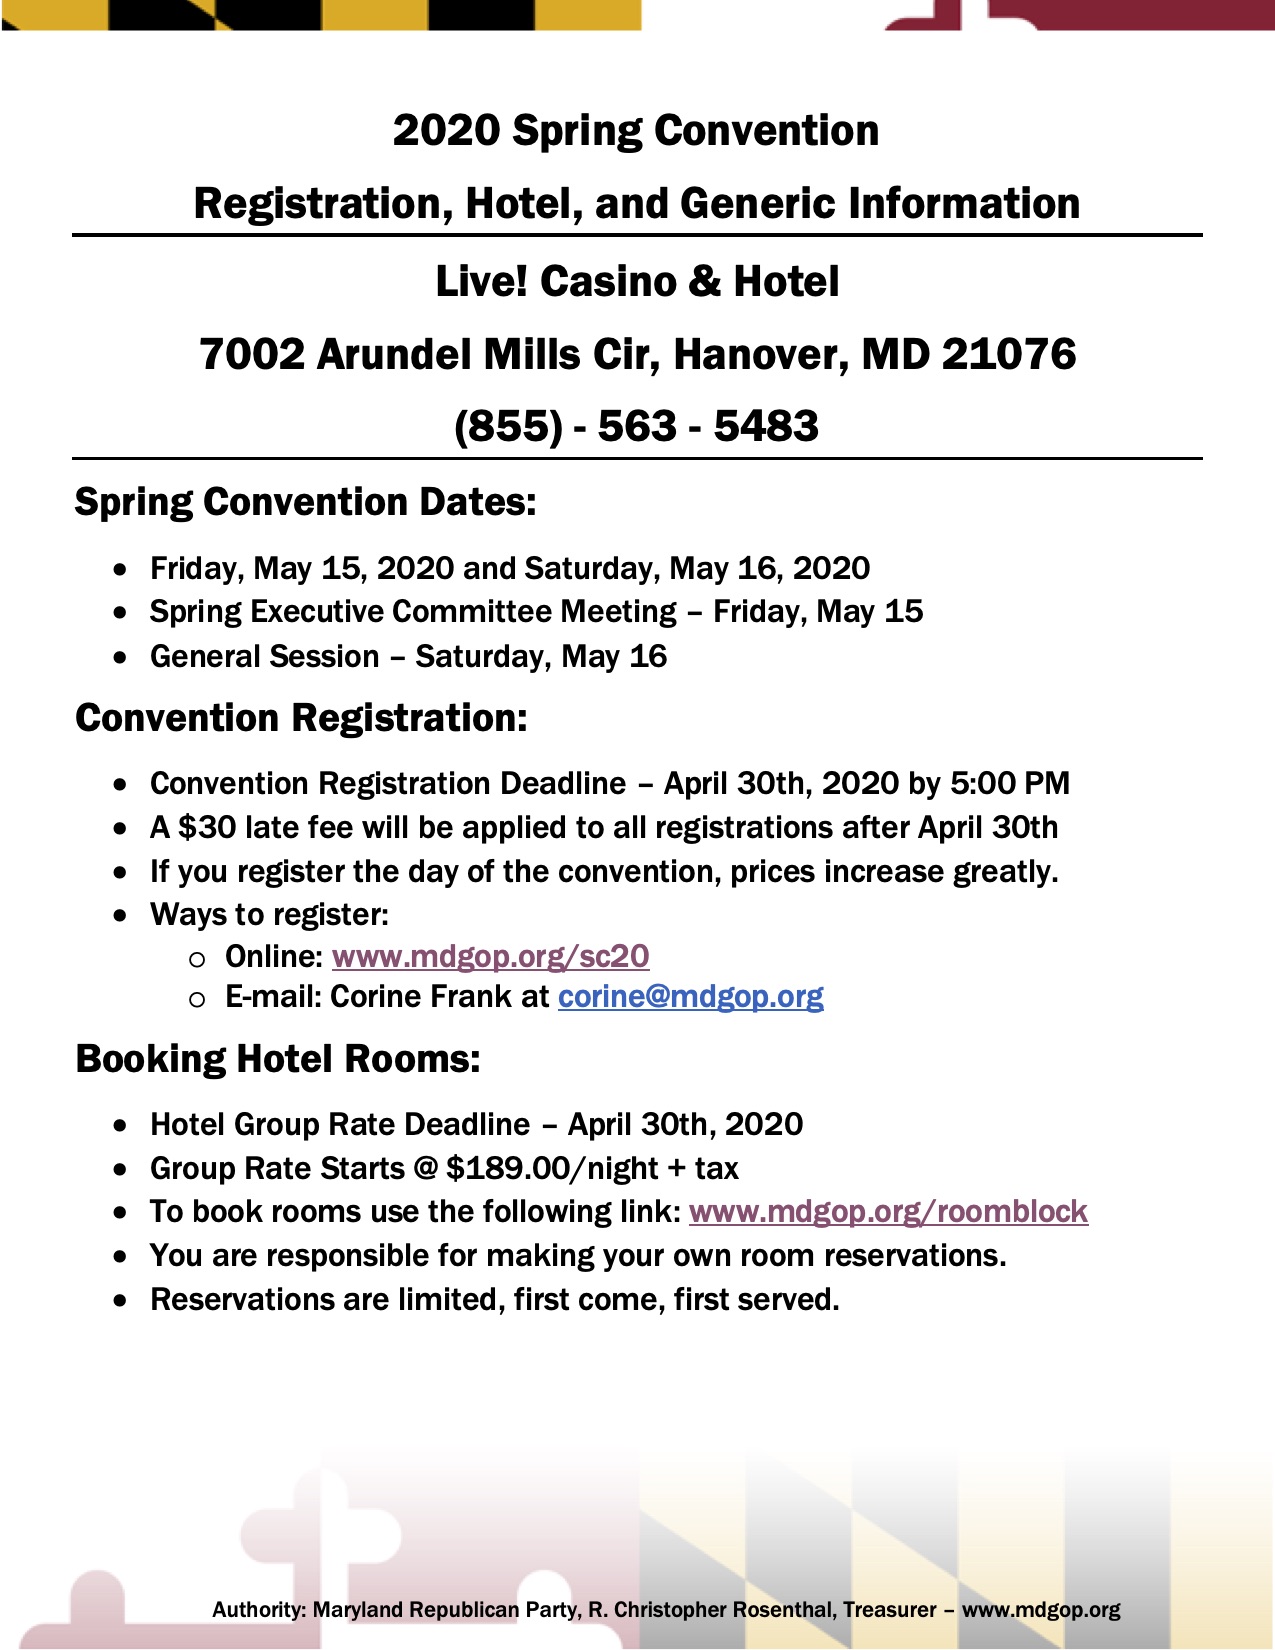 2020 Spring Convention Packet pg2